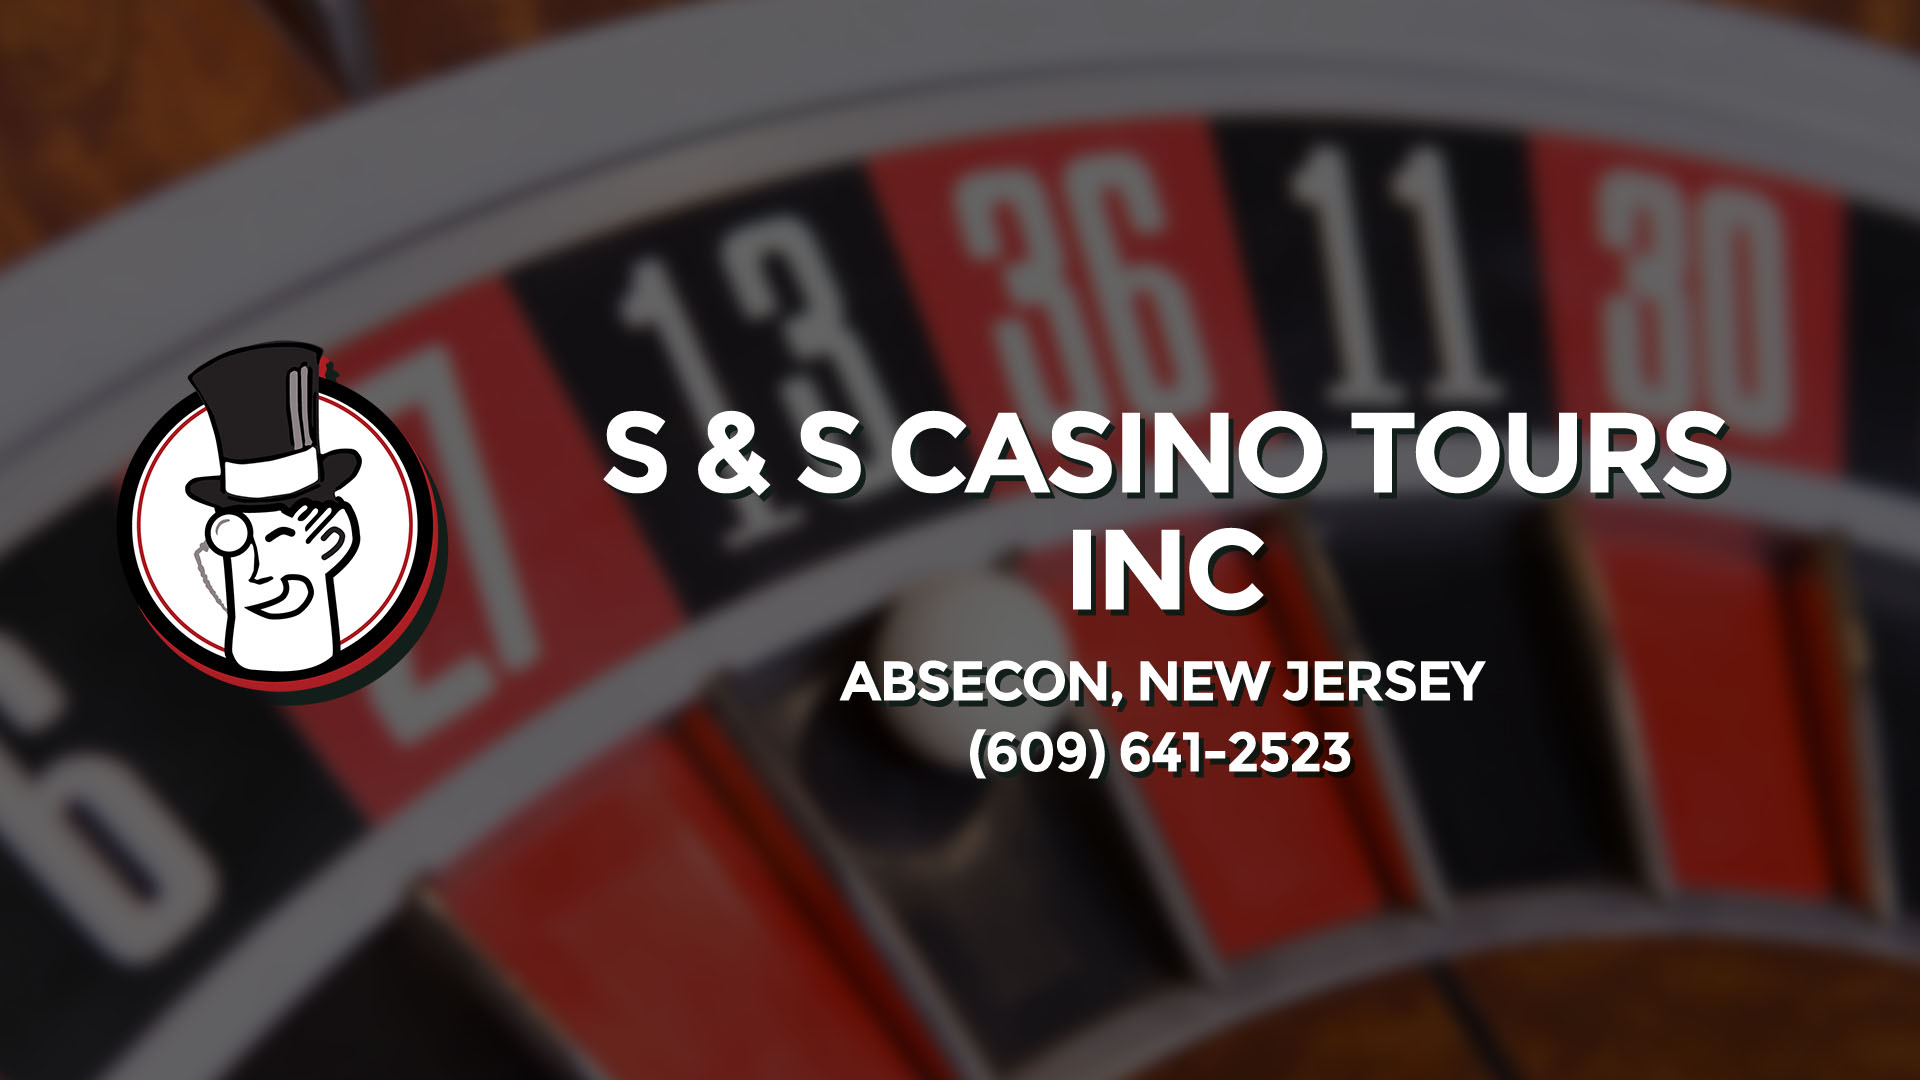 Casino tours & charters incorporated